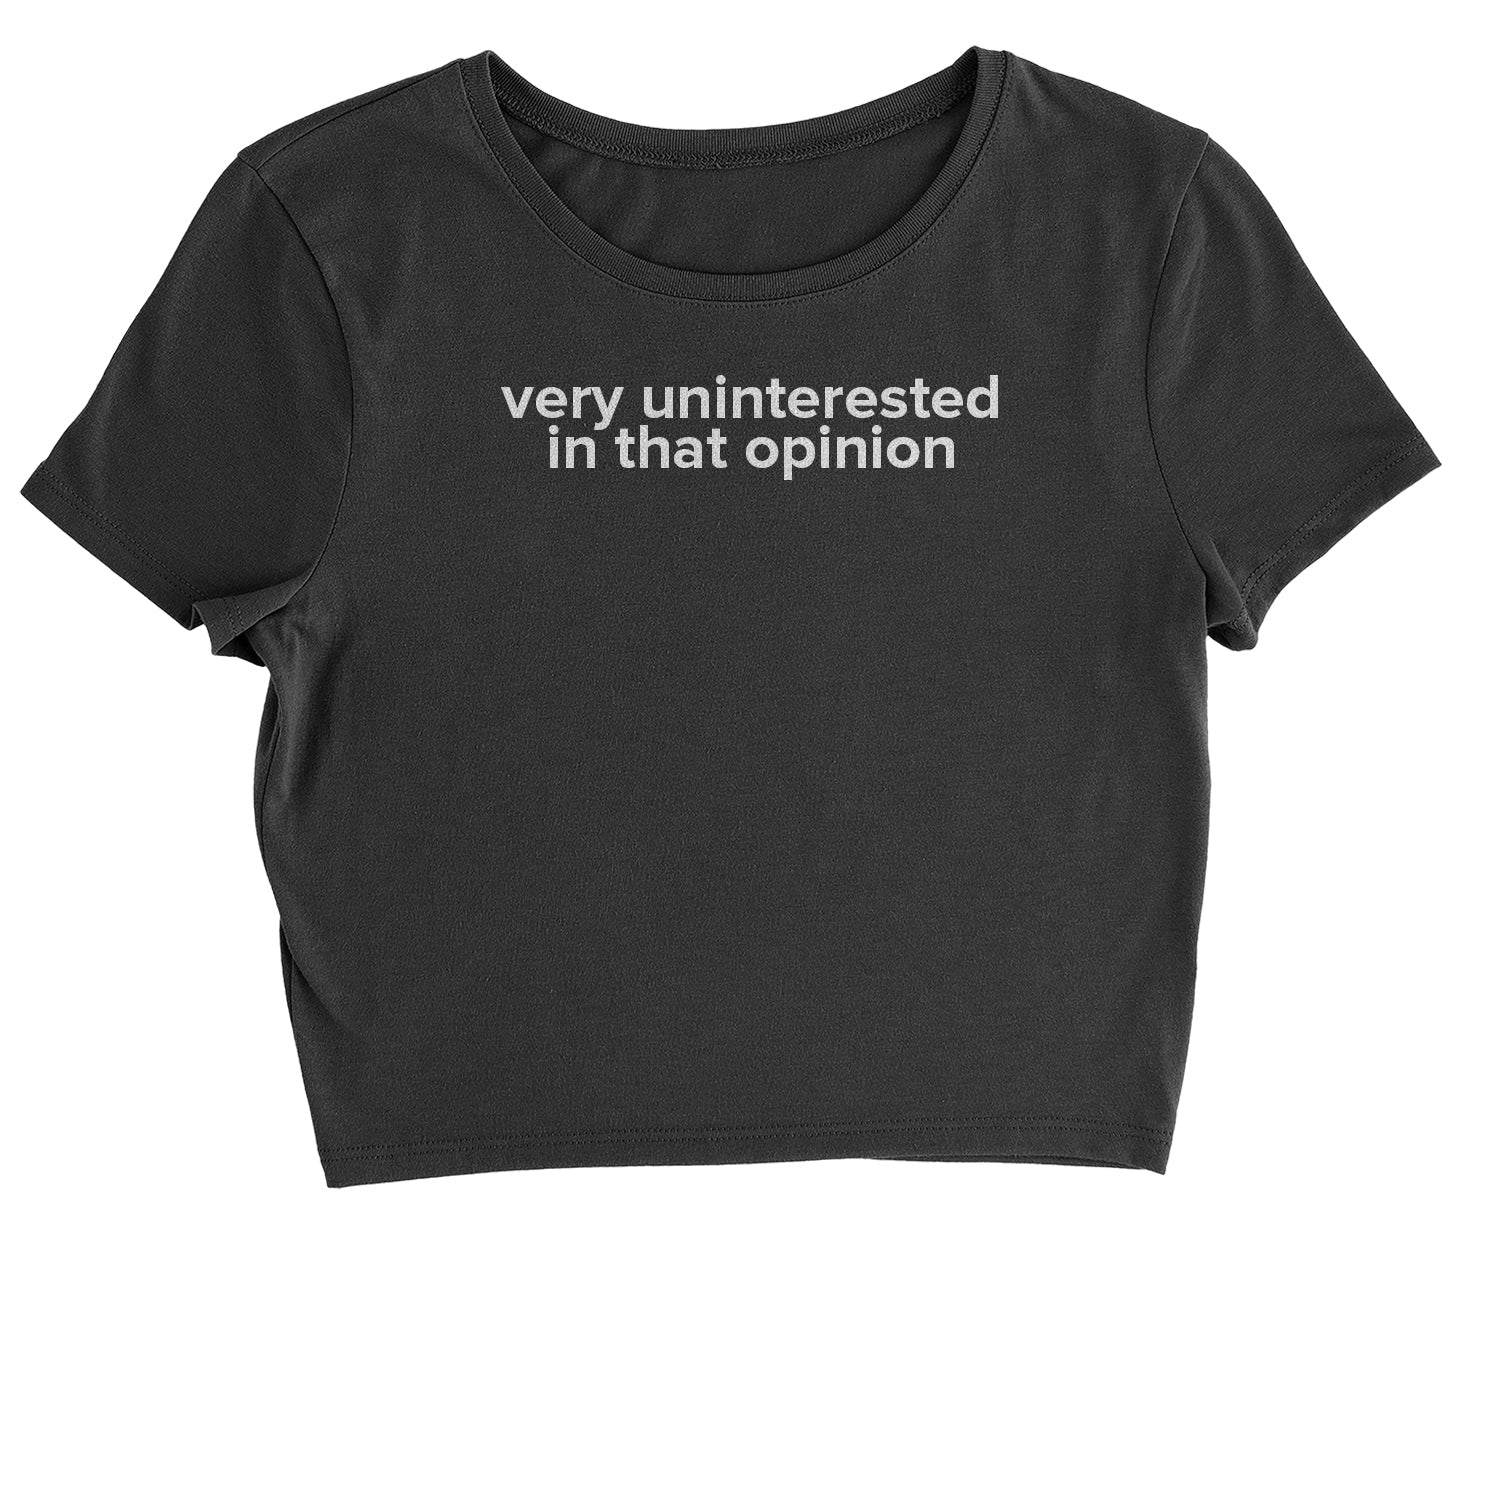 Very Uninterested In That Opinion Cropped T-Shirt alexis, creek, d, schitt, schitts by Expression Tees